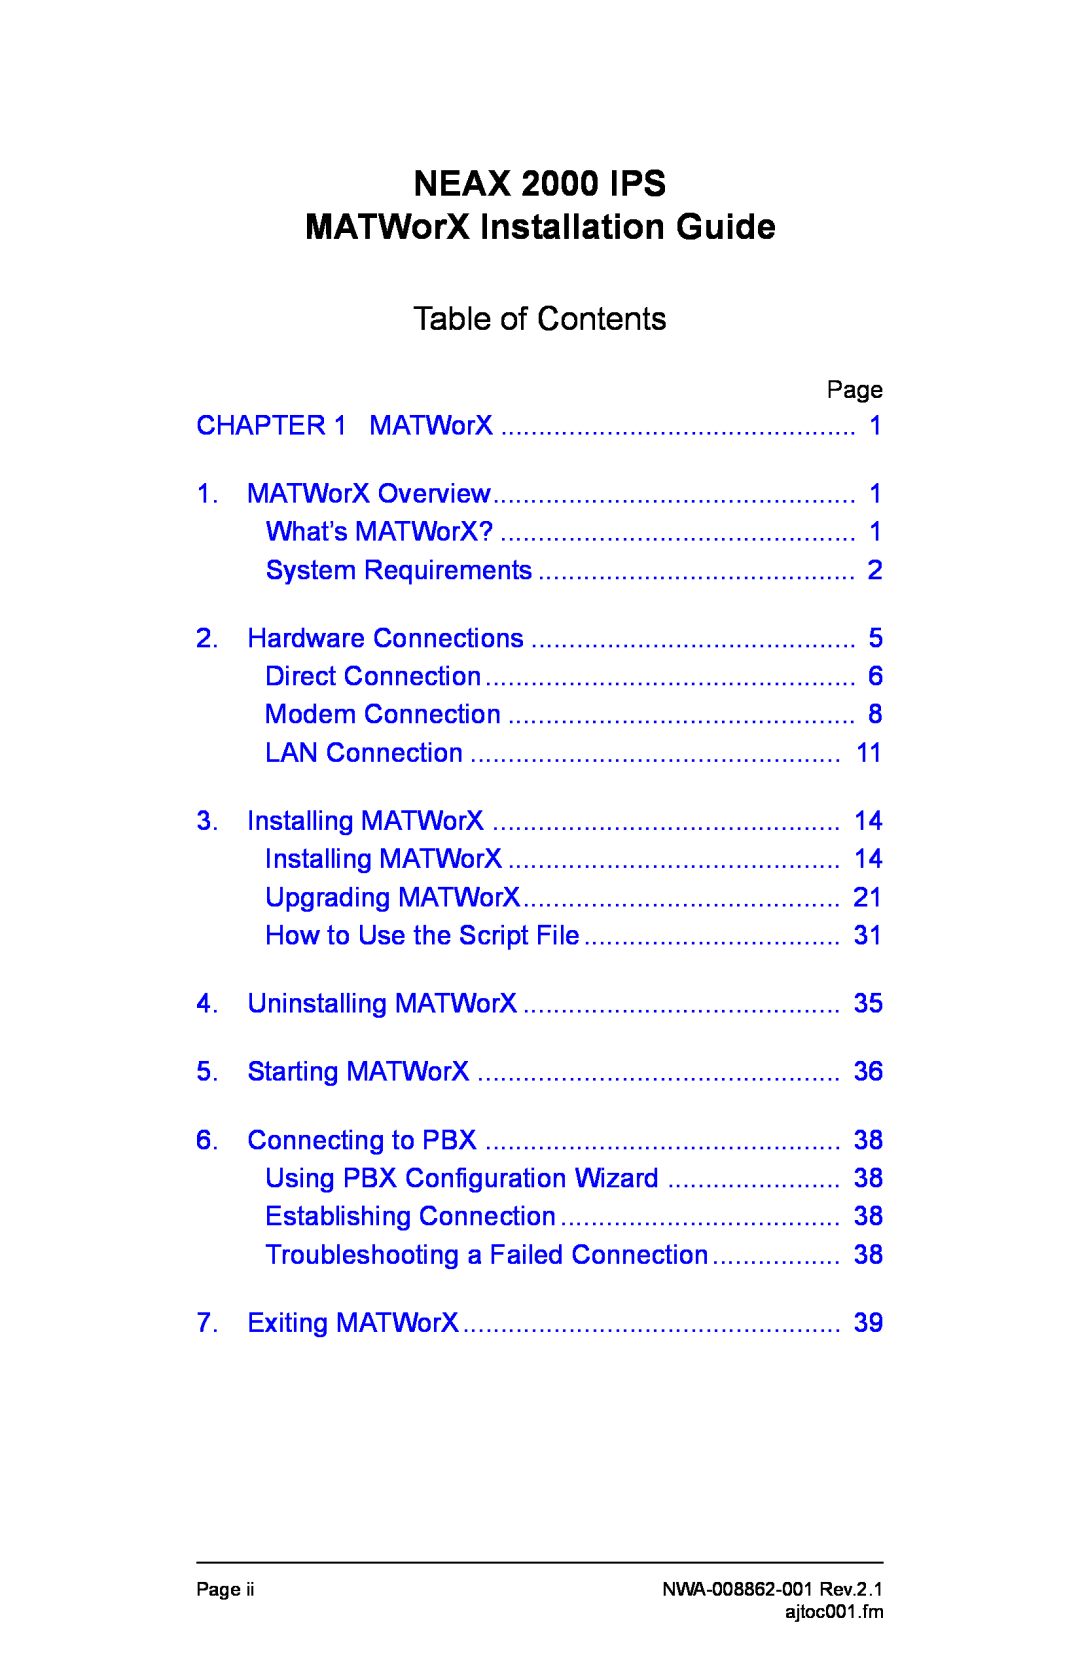 NEC NWA-008862-001 manual Table of Contents, NEAX 2000 IPS, MATWorX Installation Guide 